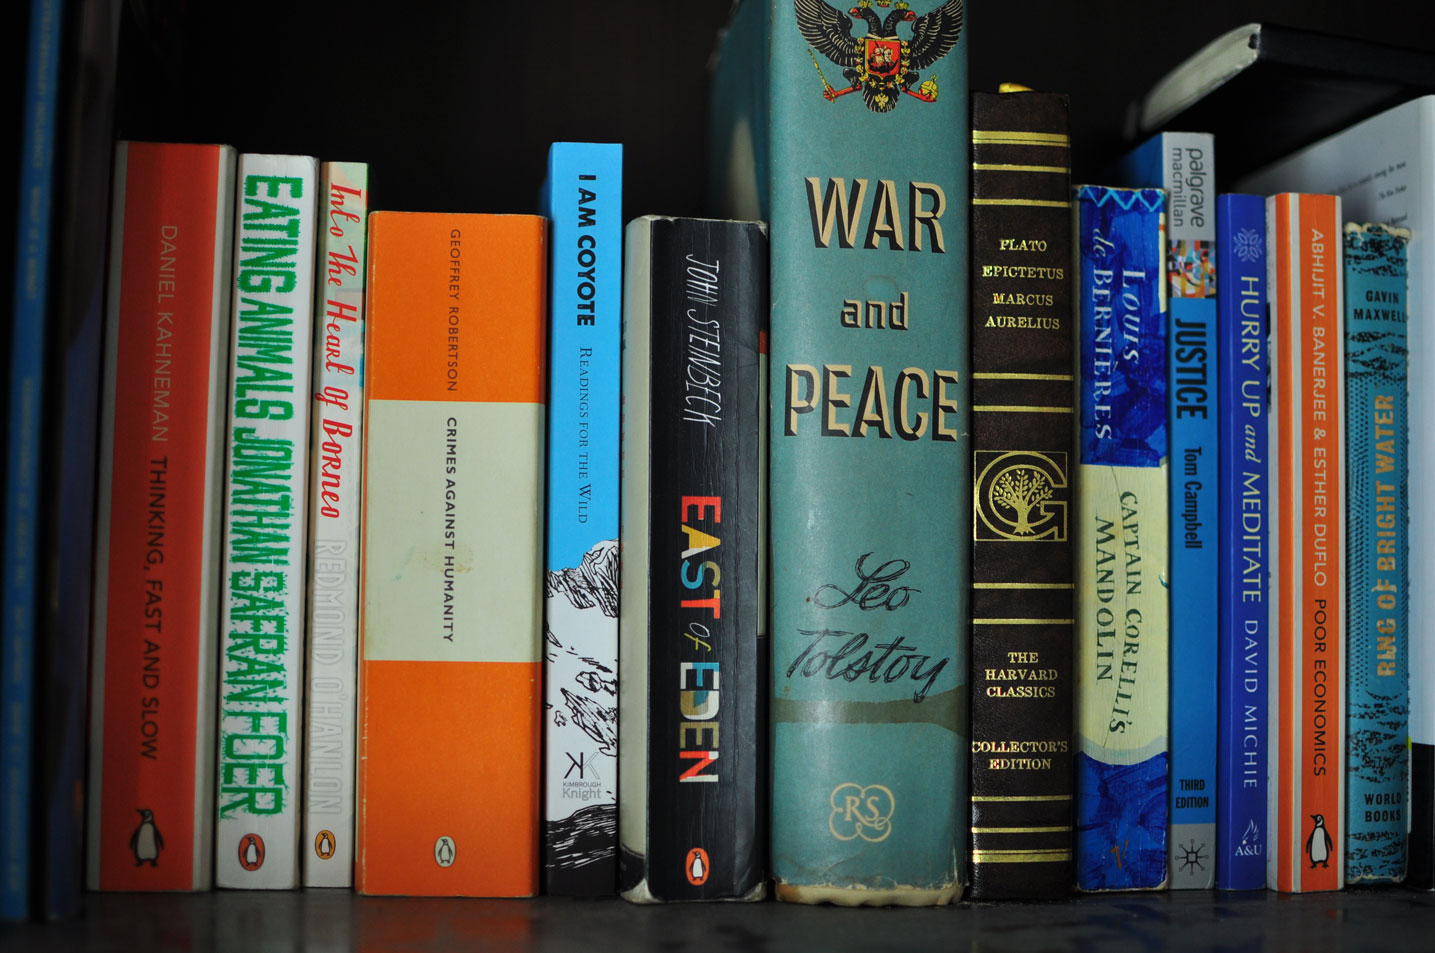 Book sitting in a book shelf with other classics like War and Peace and East of Eden